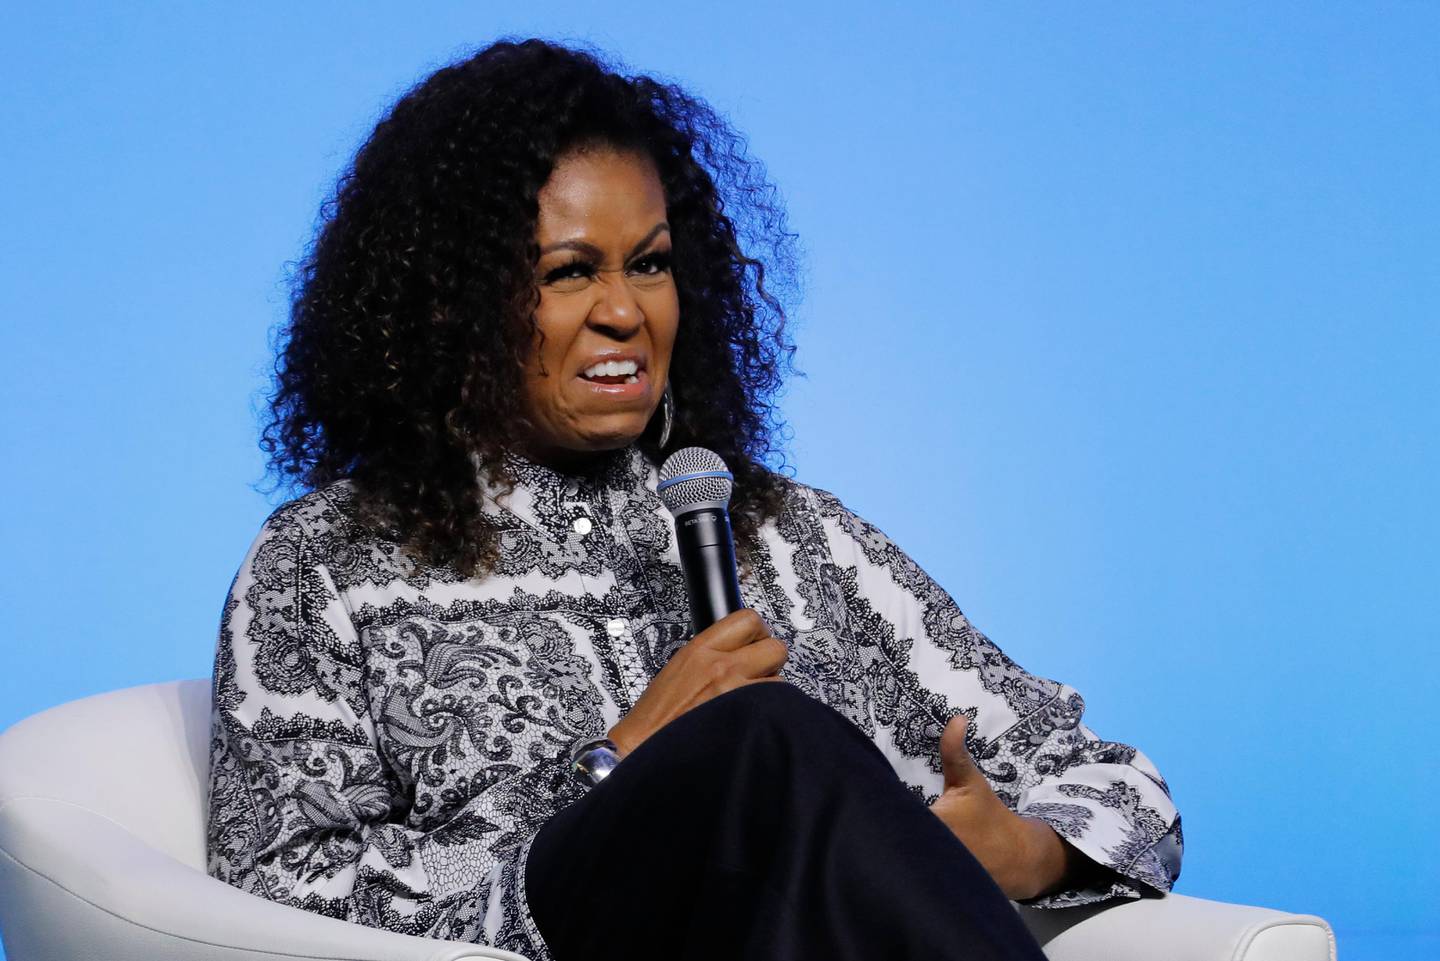 Former U.S. fist lady Michelle Obama reacts as she speaks during an event for Obama Foundation in Kuala Lumpur, Malaysia, Thursday, Dec. 12, 2019. Obama and actress Julia Roberts attend inaugural Gathering of Rising Leaders in the Asia Pacific organized by the Obama Foundation. (AP Photo/Vincent Thian)